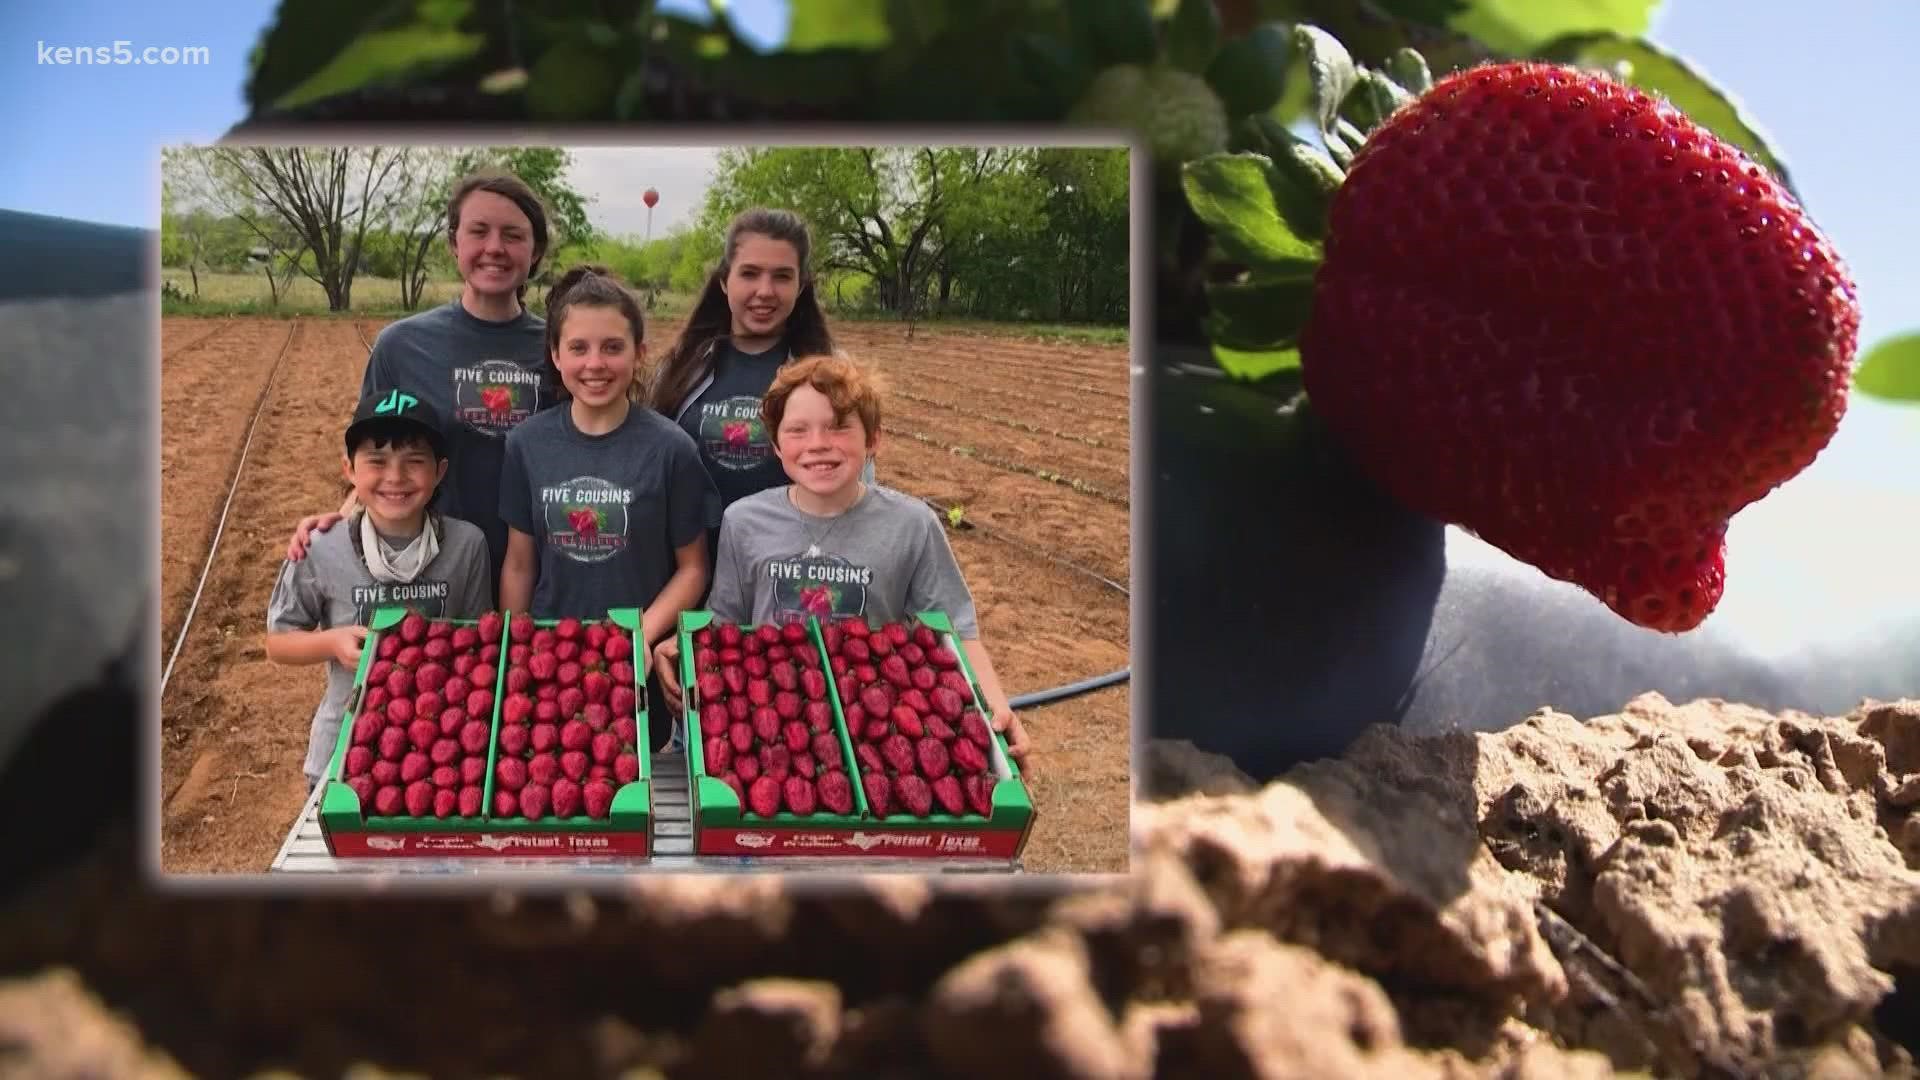 When you mention Poteet, Texas, many people think about their iconic strawberries!